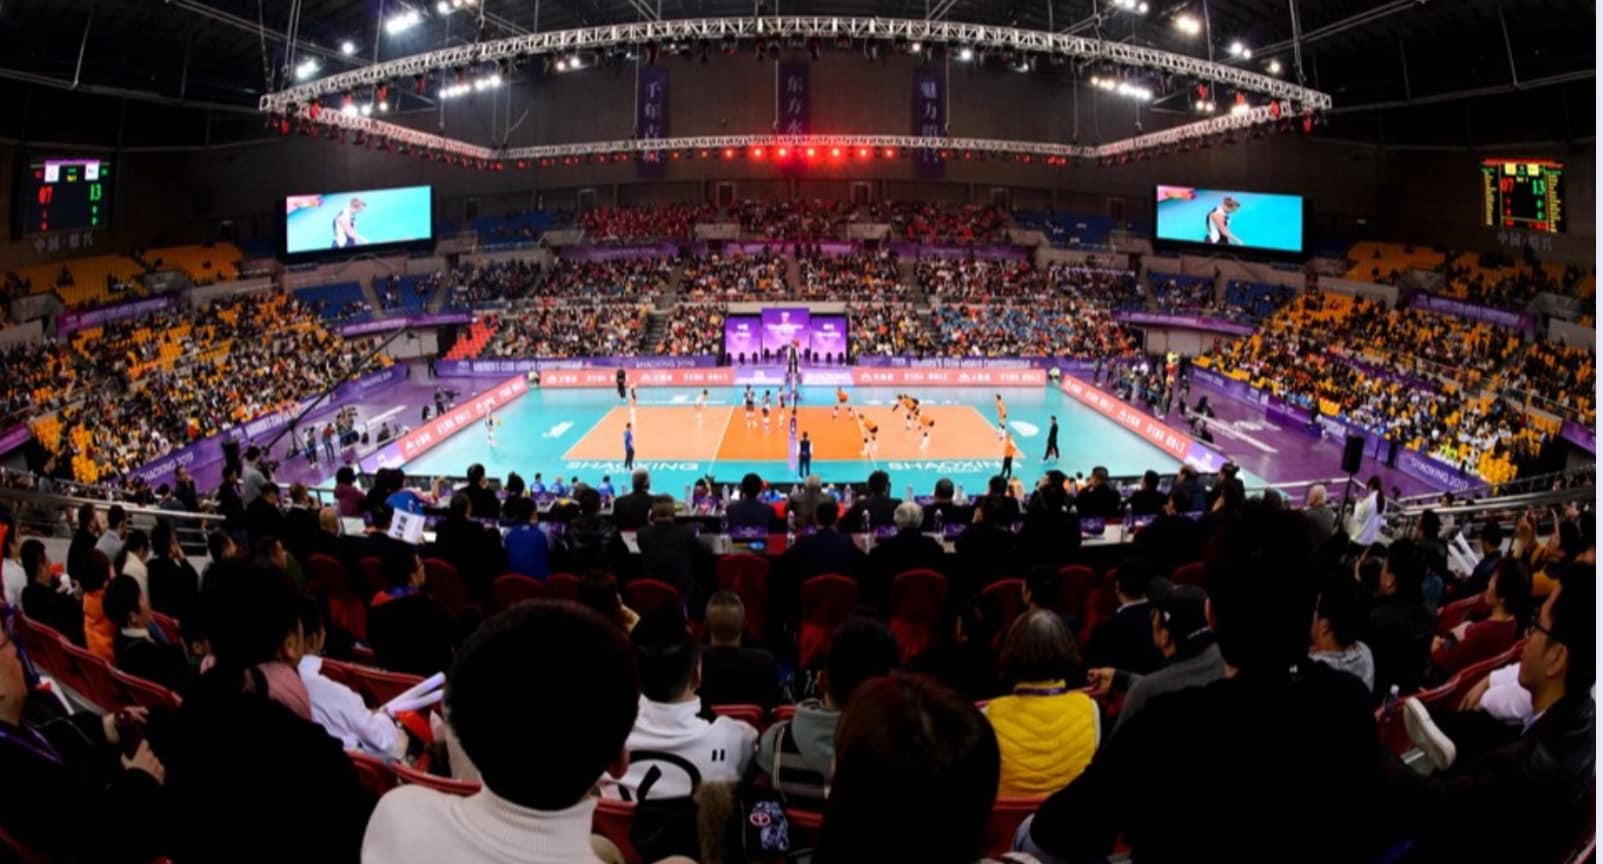 Final Results at the 2018 Women's Volleyball World Championships